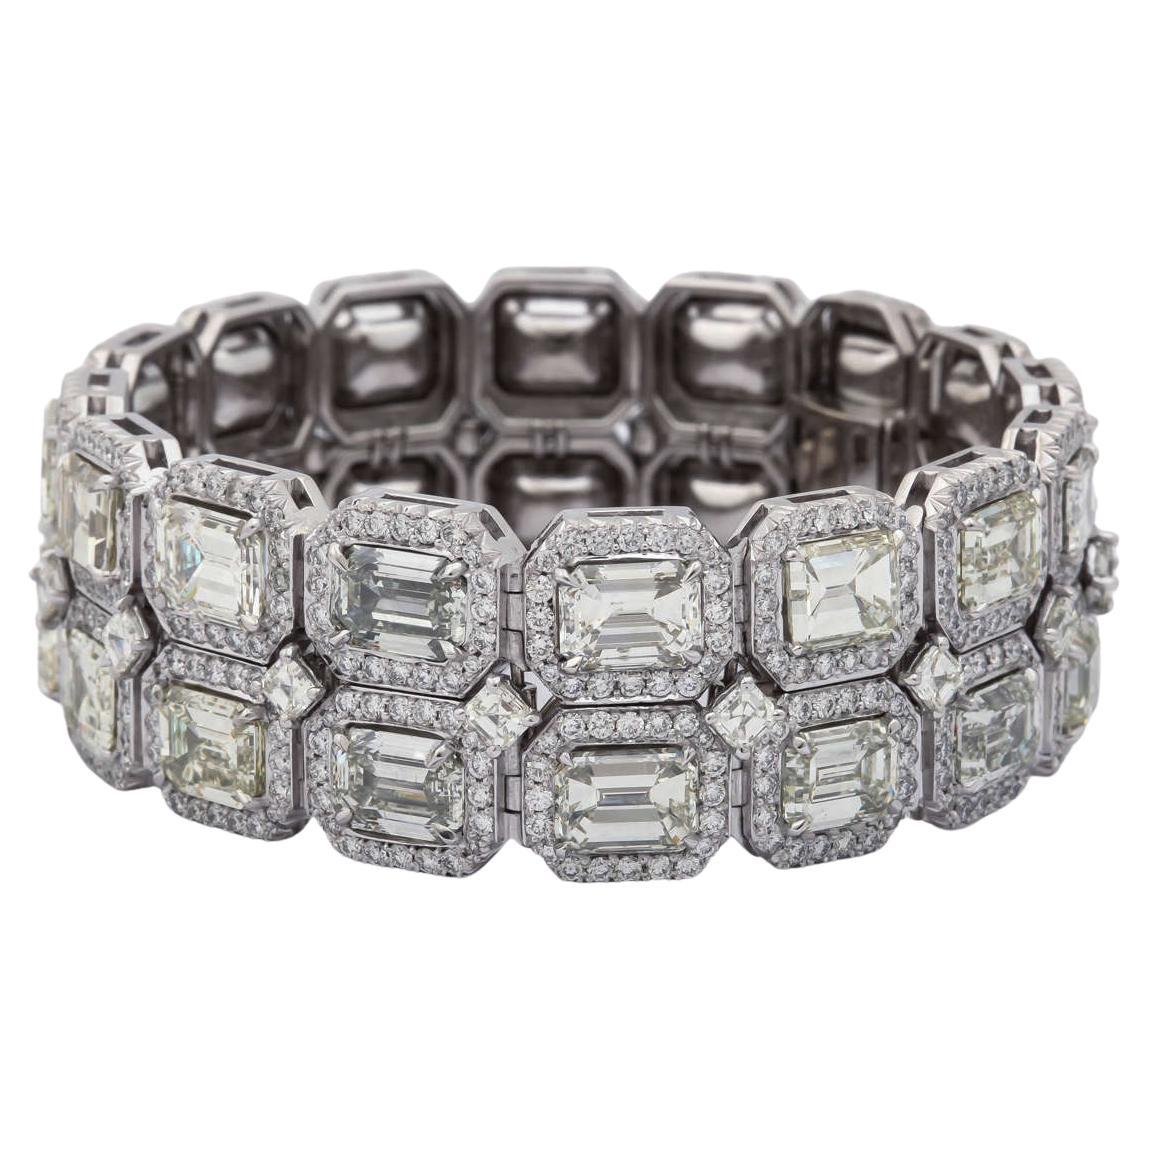 This absolutely one of a kind bracelet features 50 carats of diamonds, each emerald cut diamond is from 1.00 carat to 2.00 carats plus. 

Set in Platinum mounting
Diana M. is a leading supplier of top-quality fine jewelry for over 35 years.
Diana M